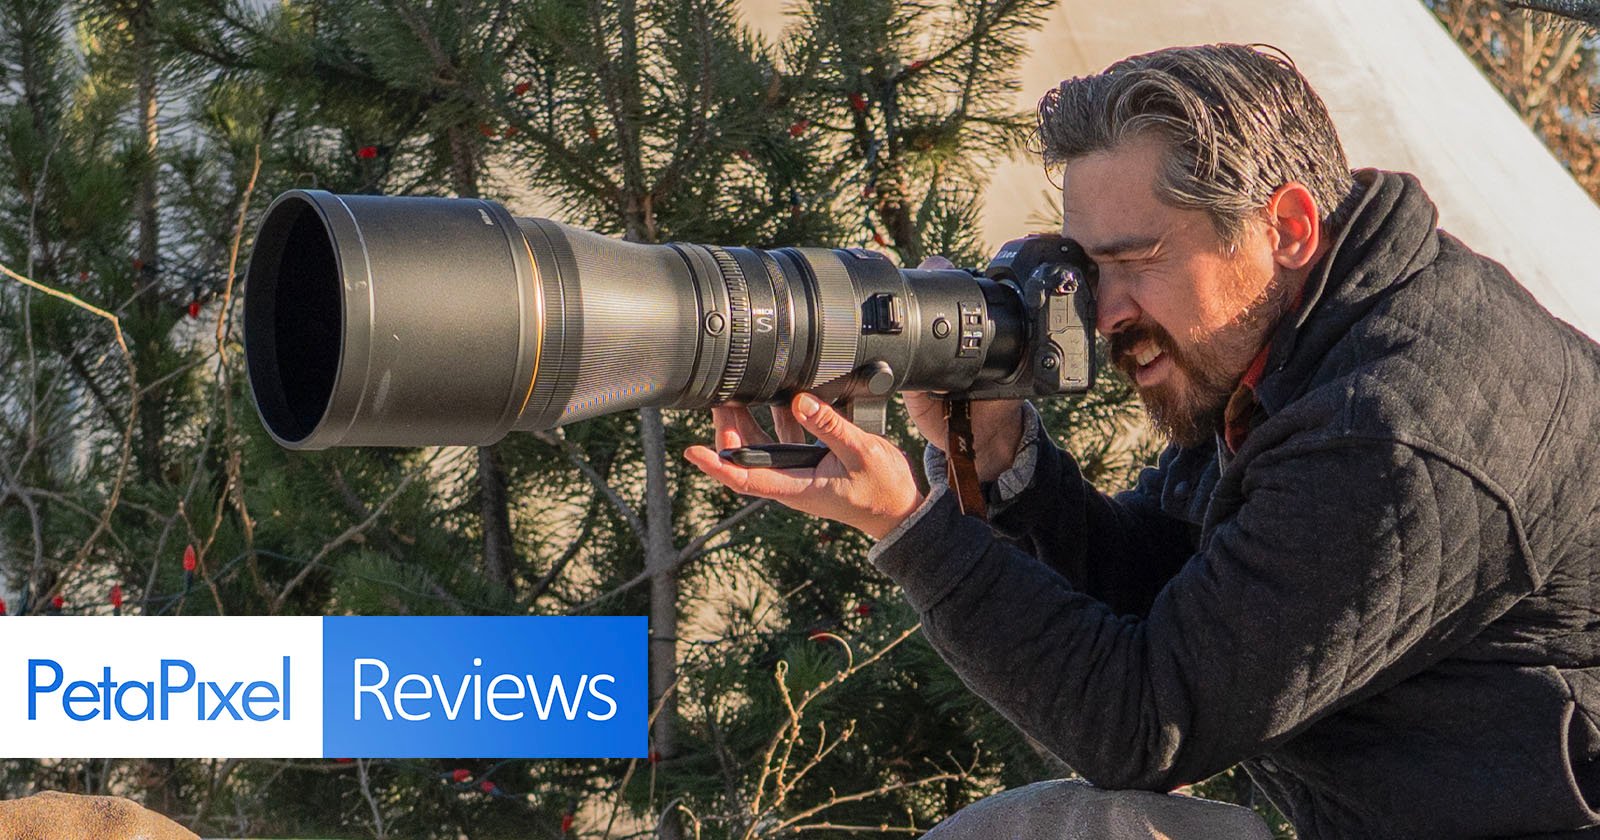 Nikon Z 600mm f/4 S TC VR Review: Can a Lens Be Worth $15,500?